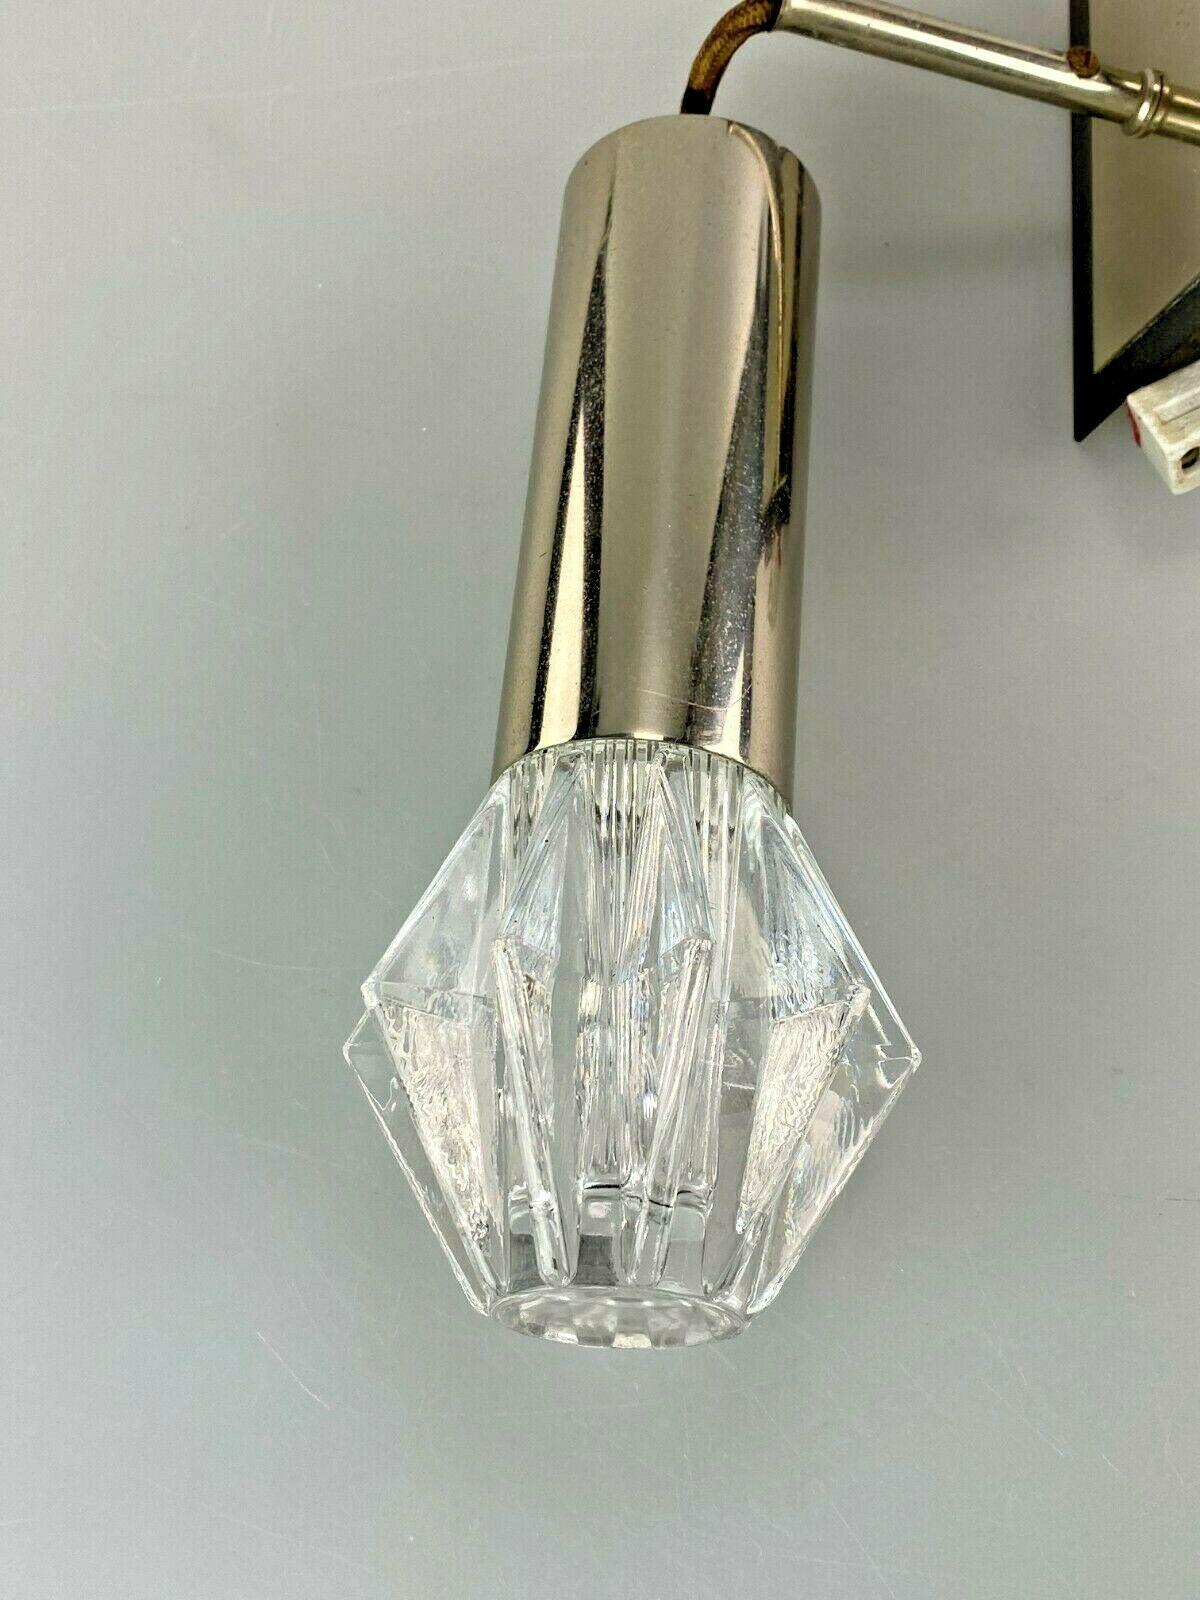 German 60s 70s Lamp Light Wall Lamp Chrome Glass Space Age Design For Sale